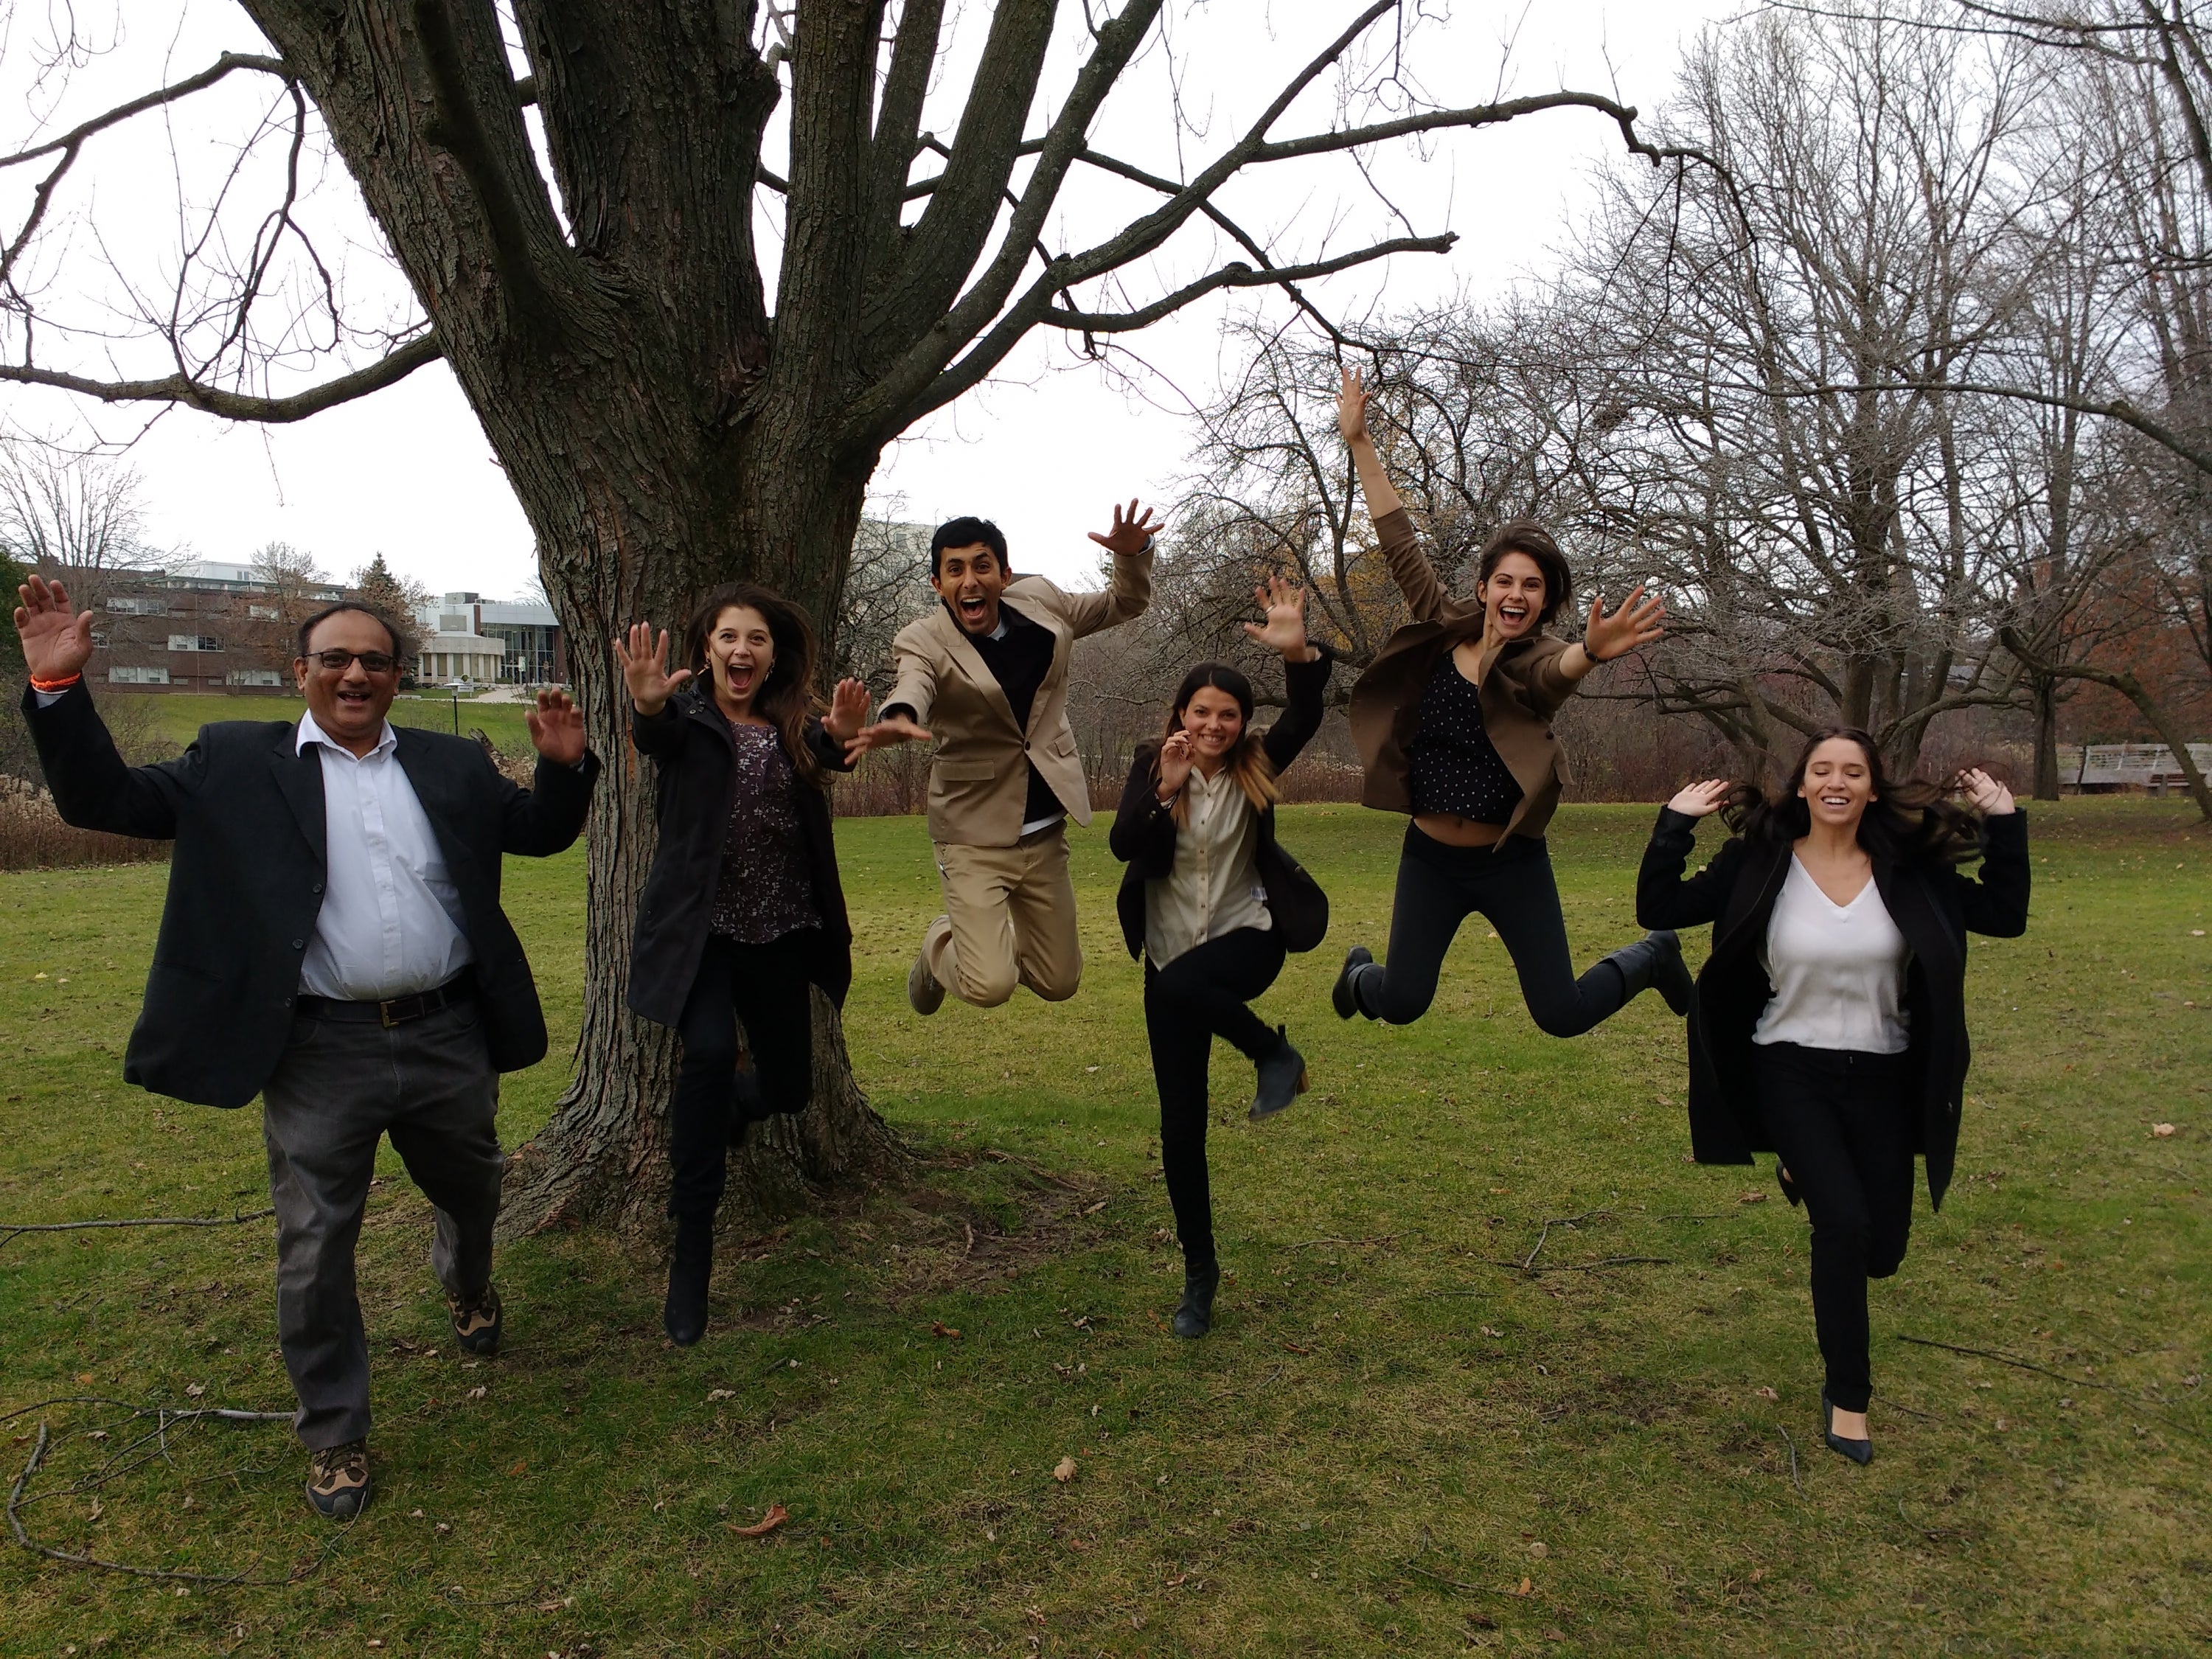 University of Waterloo students leaping in the air outside